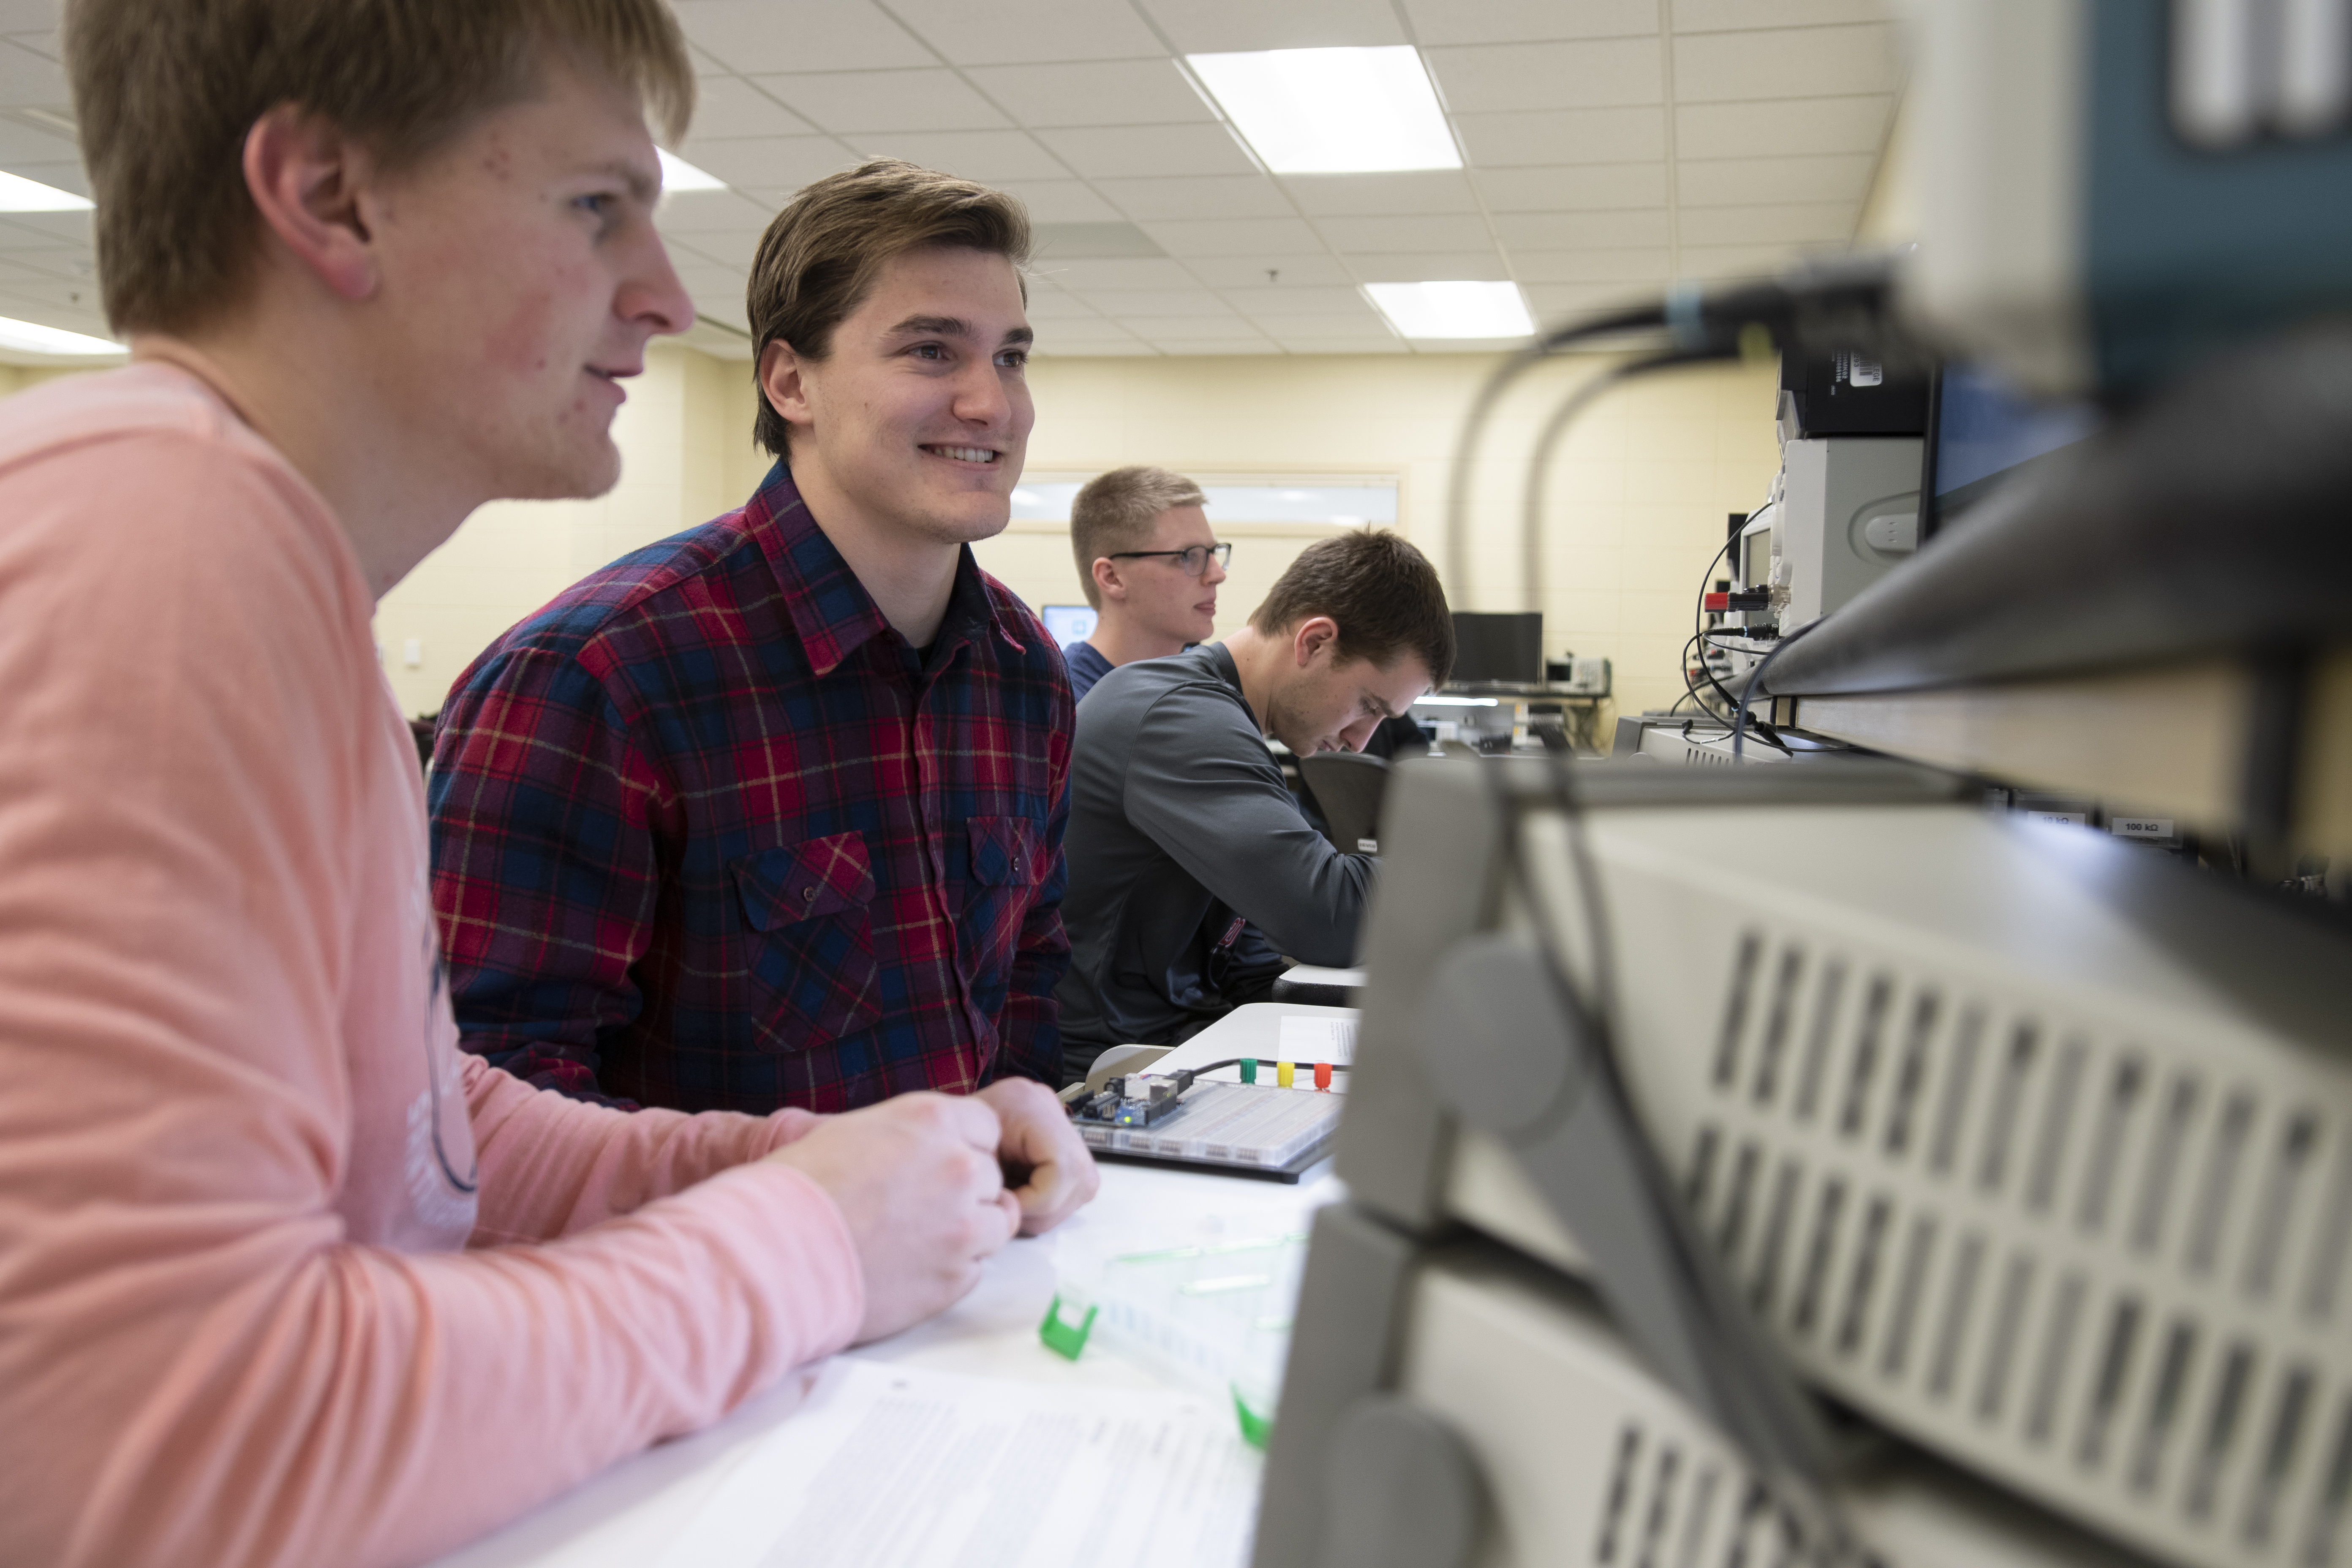 Male students look at a screen in an electrical lab